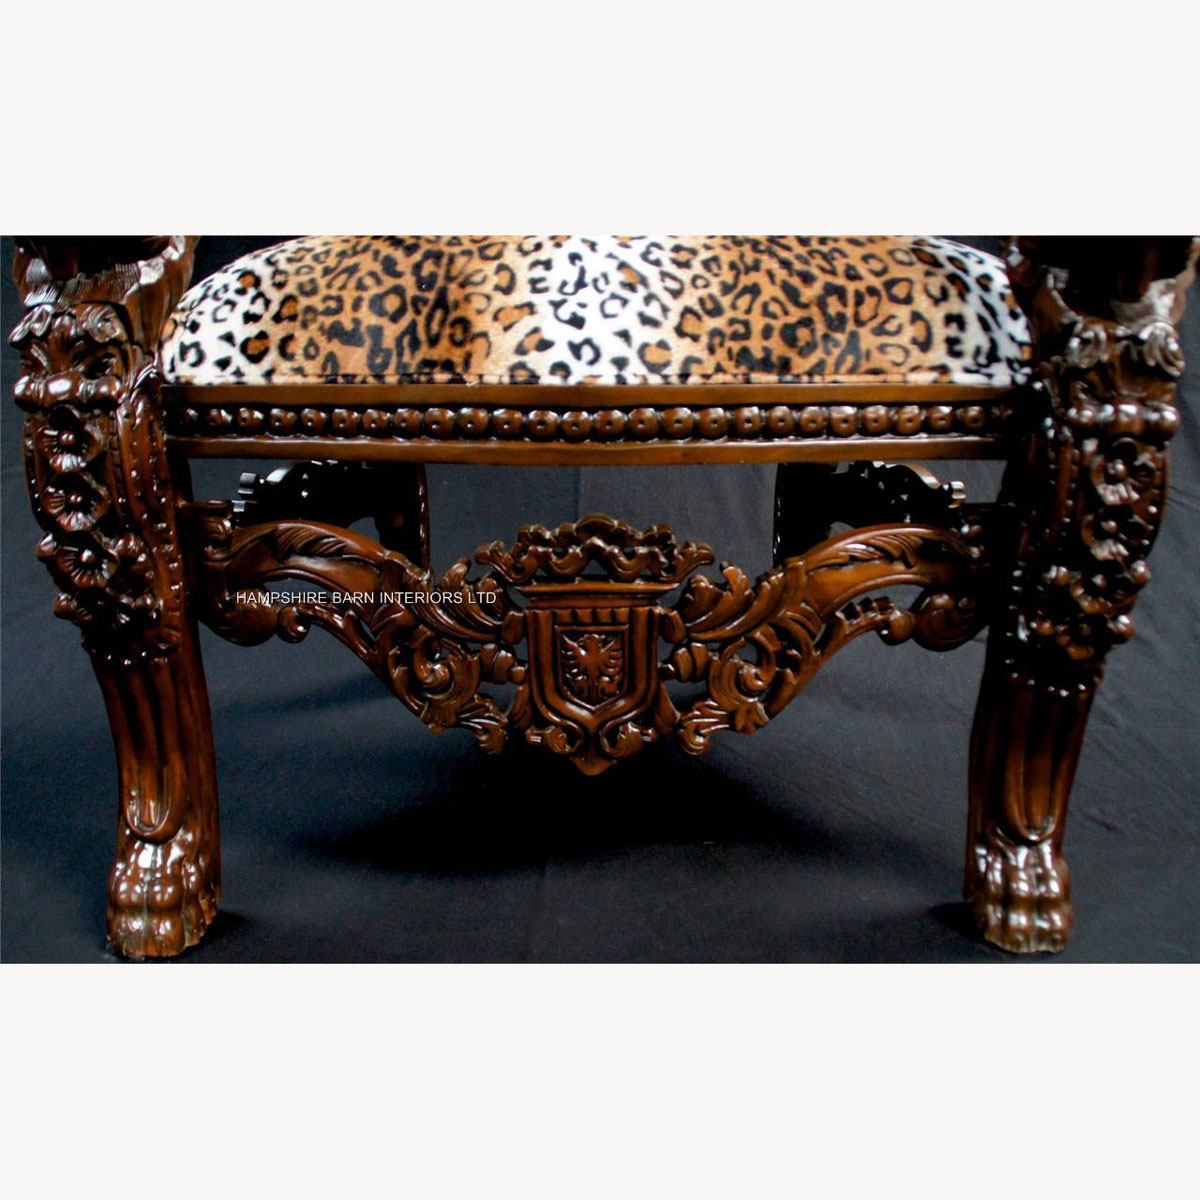 Mahogany Lion King Throne Chair With Leopard Animal Print Textured Fabric 2 - Hampshire Barn Interiors - Mahogany Lion King Throne Chair With Leopard Animal Print Textured Fabric -